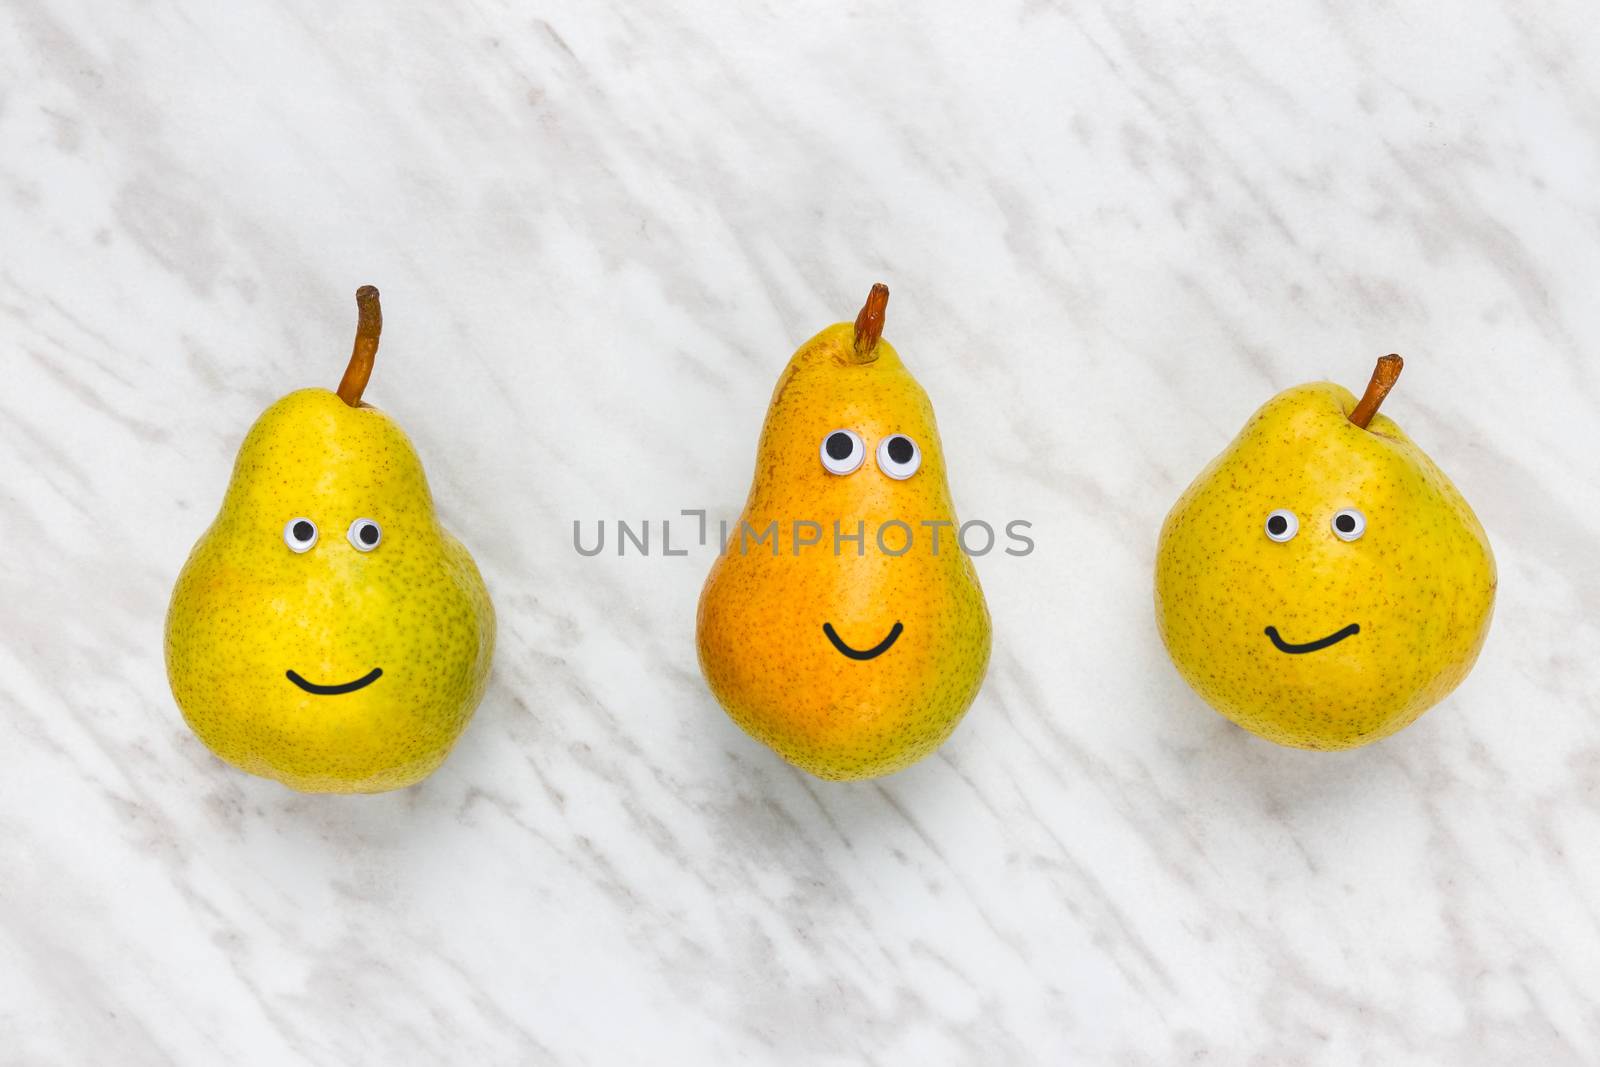 Funny smiling pears on marble background by anikasalsera